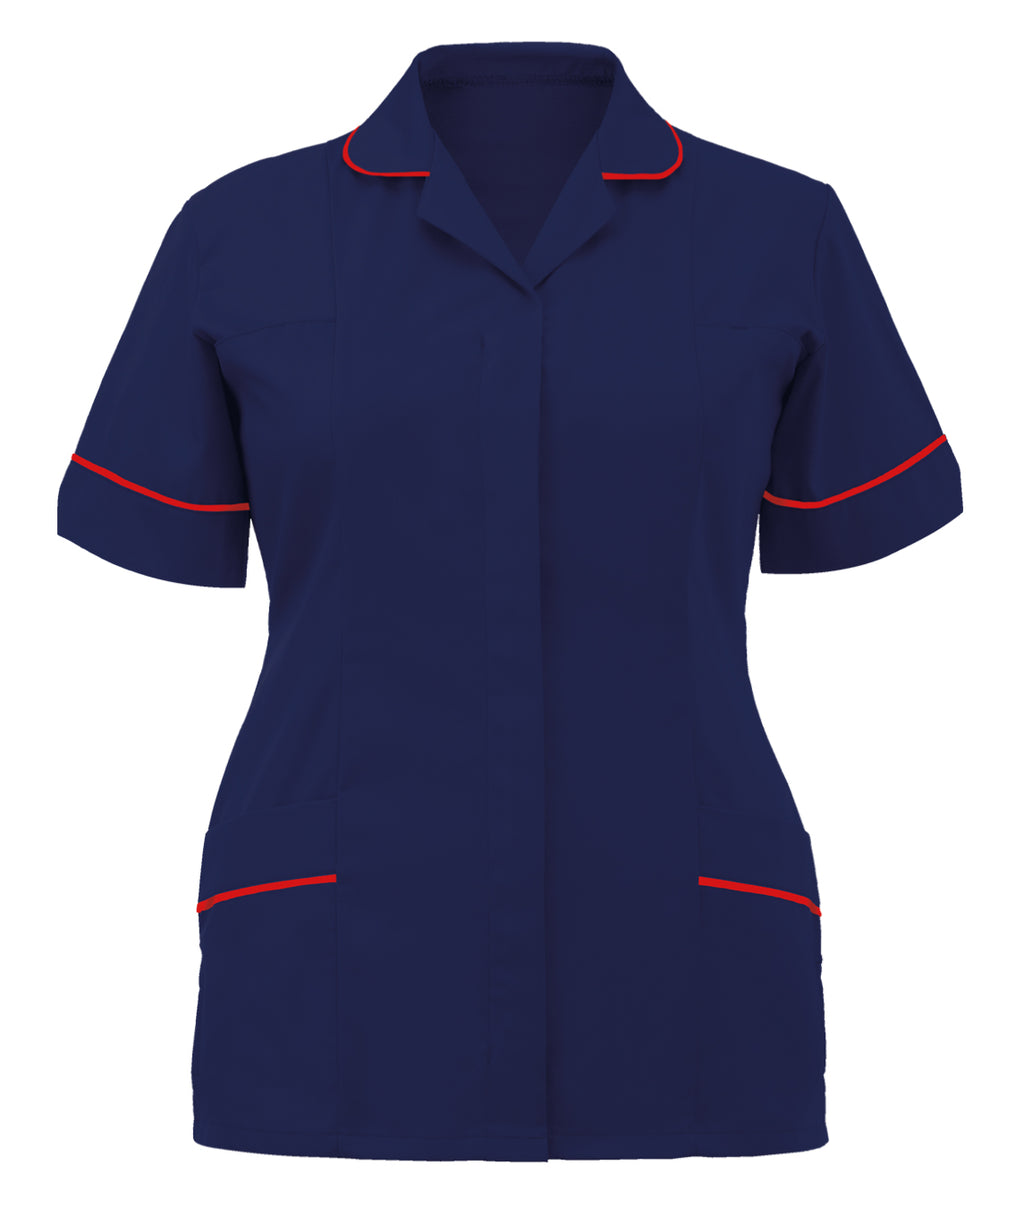 Royal Blue Tunic with Contrasting Trims order online with